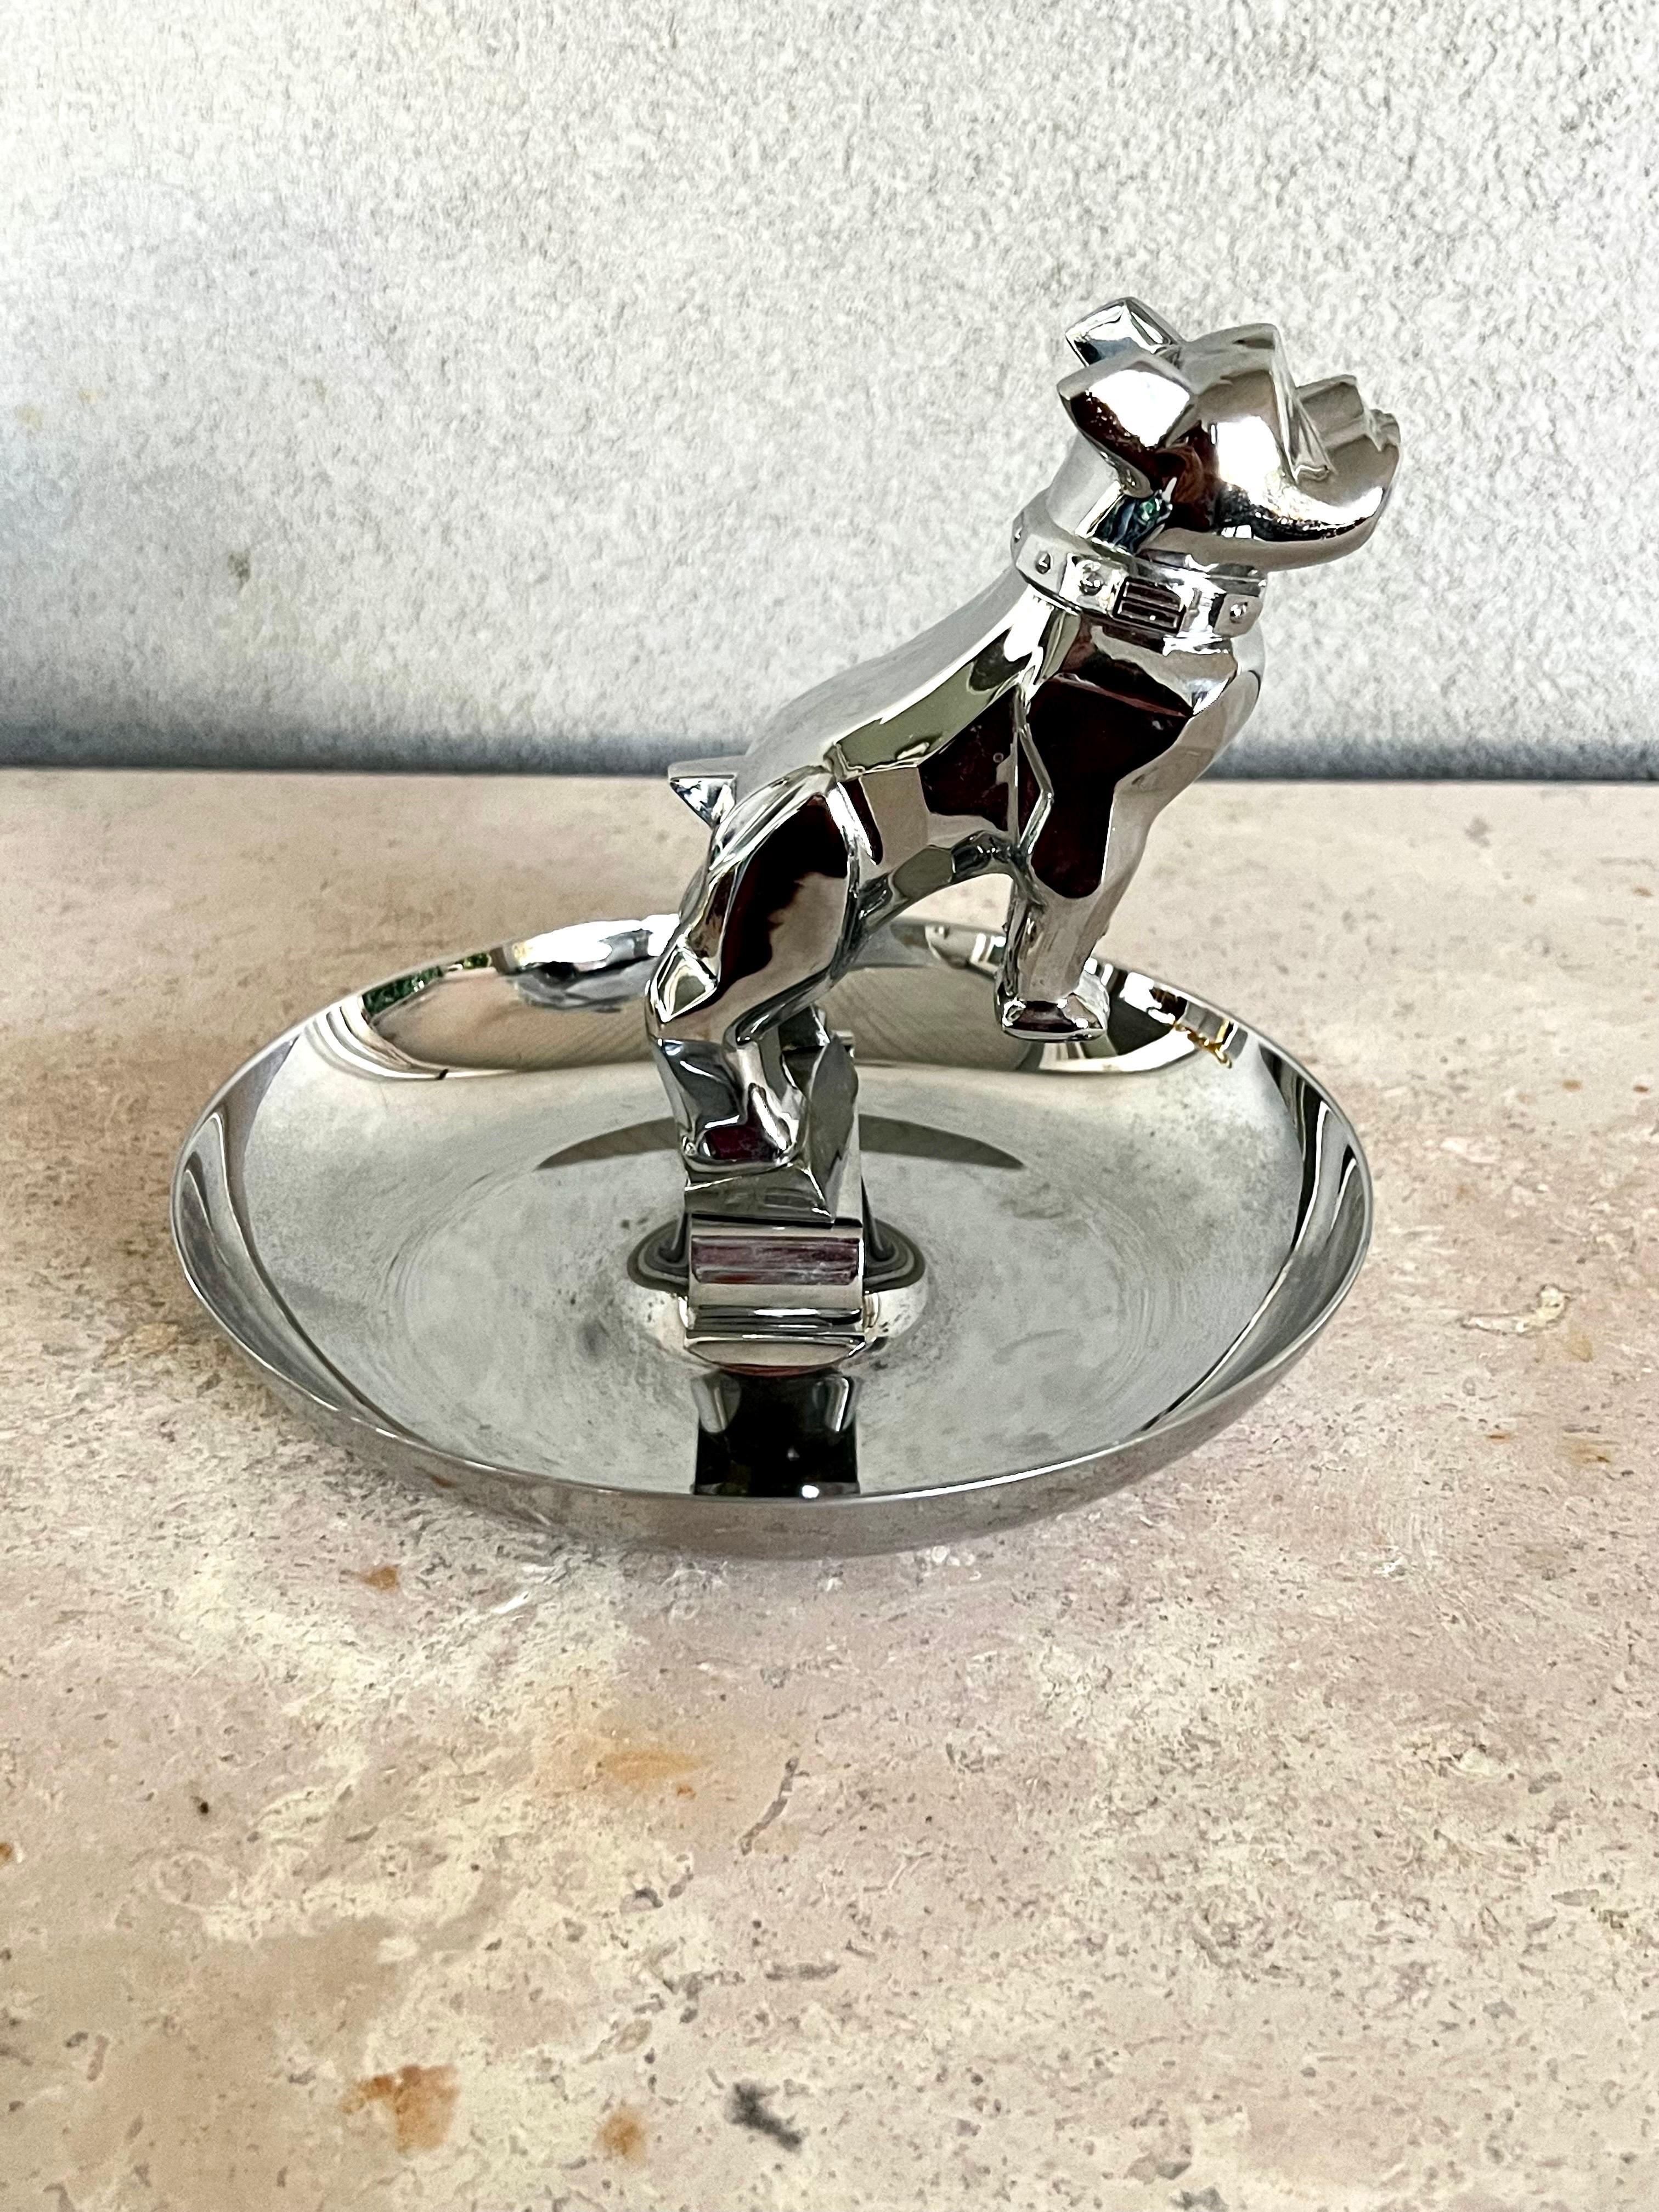 A well-known and popular cigar ashtray, this vintage piece has the classic Mack Truck Bulldog hood ornament , poised on its hind legs at its center. There is a cigar rest on each side of the Bulldog.

The entire piece is made of chrome and it is